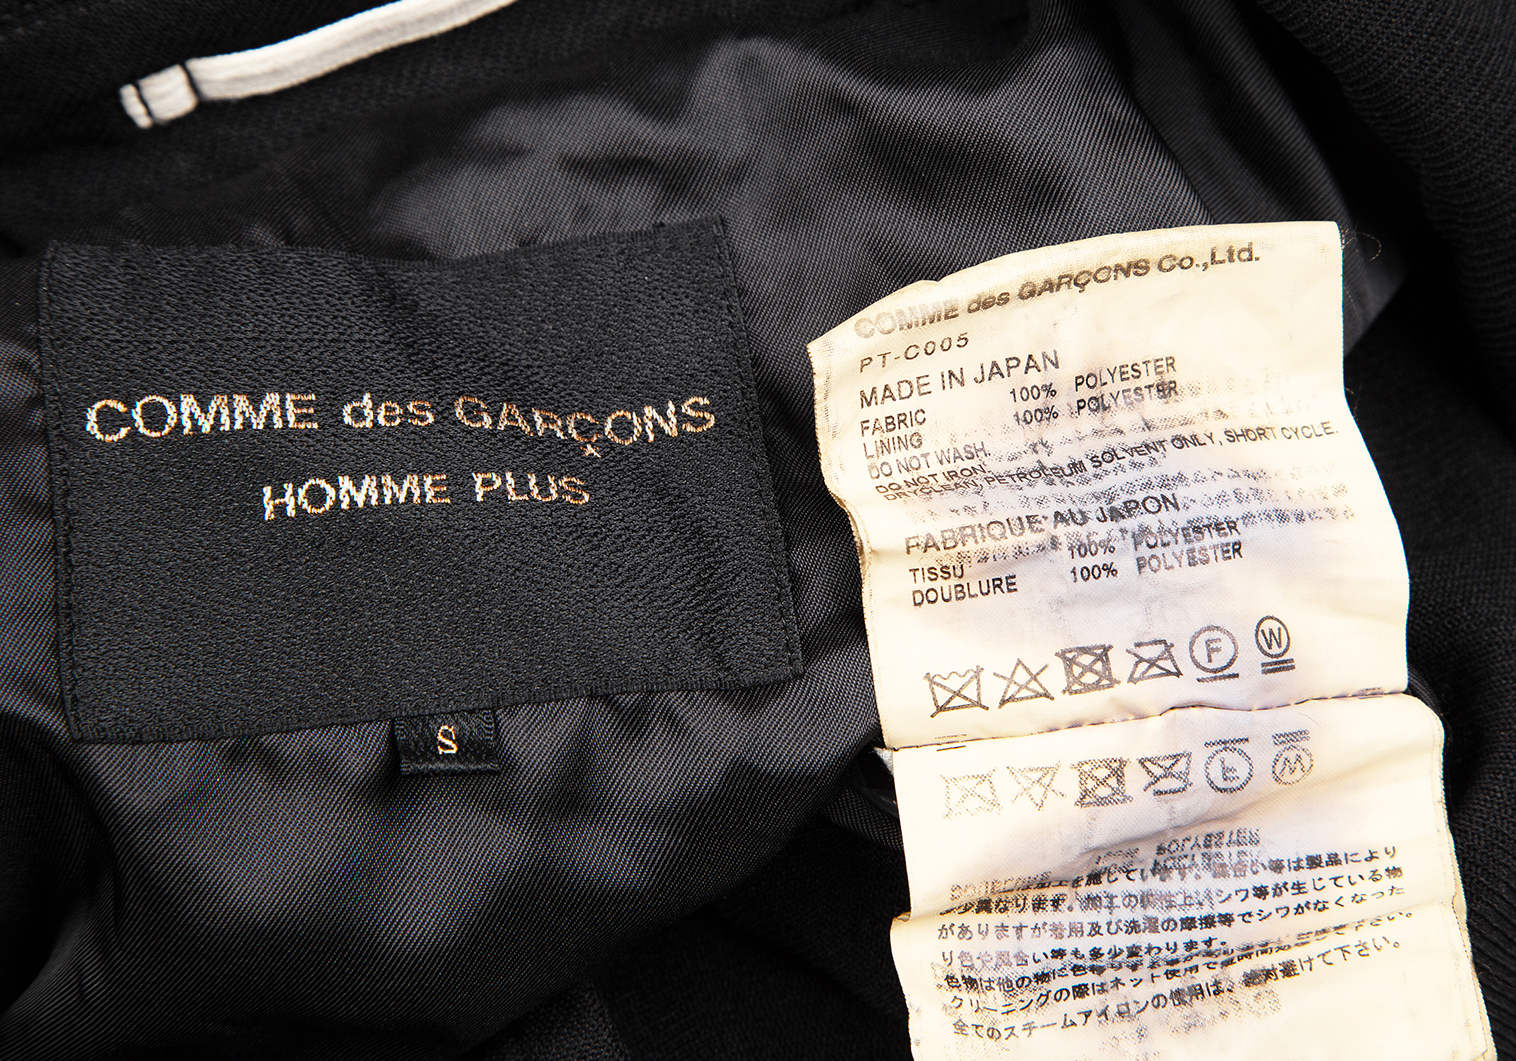 M69その他の出品物はコチラCOMME des GARCONS HOMME PLUS コート